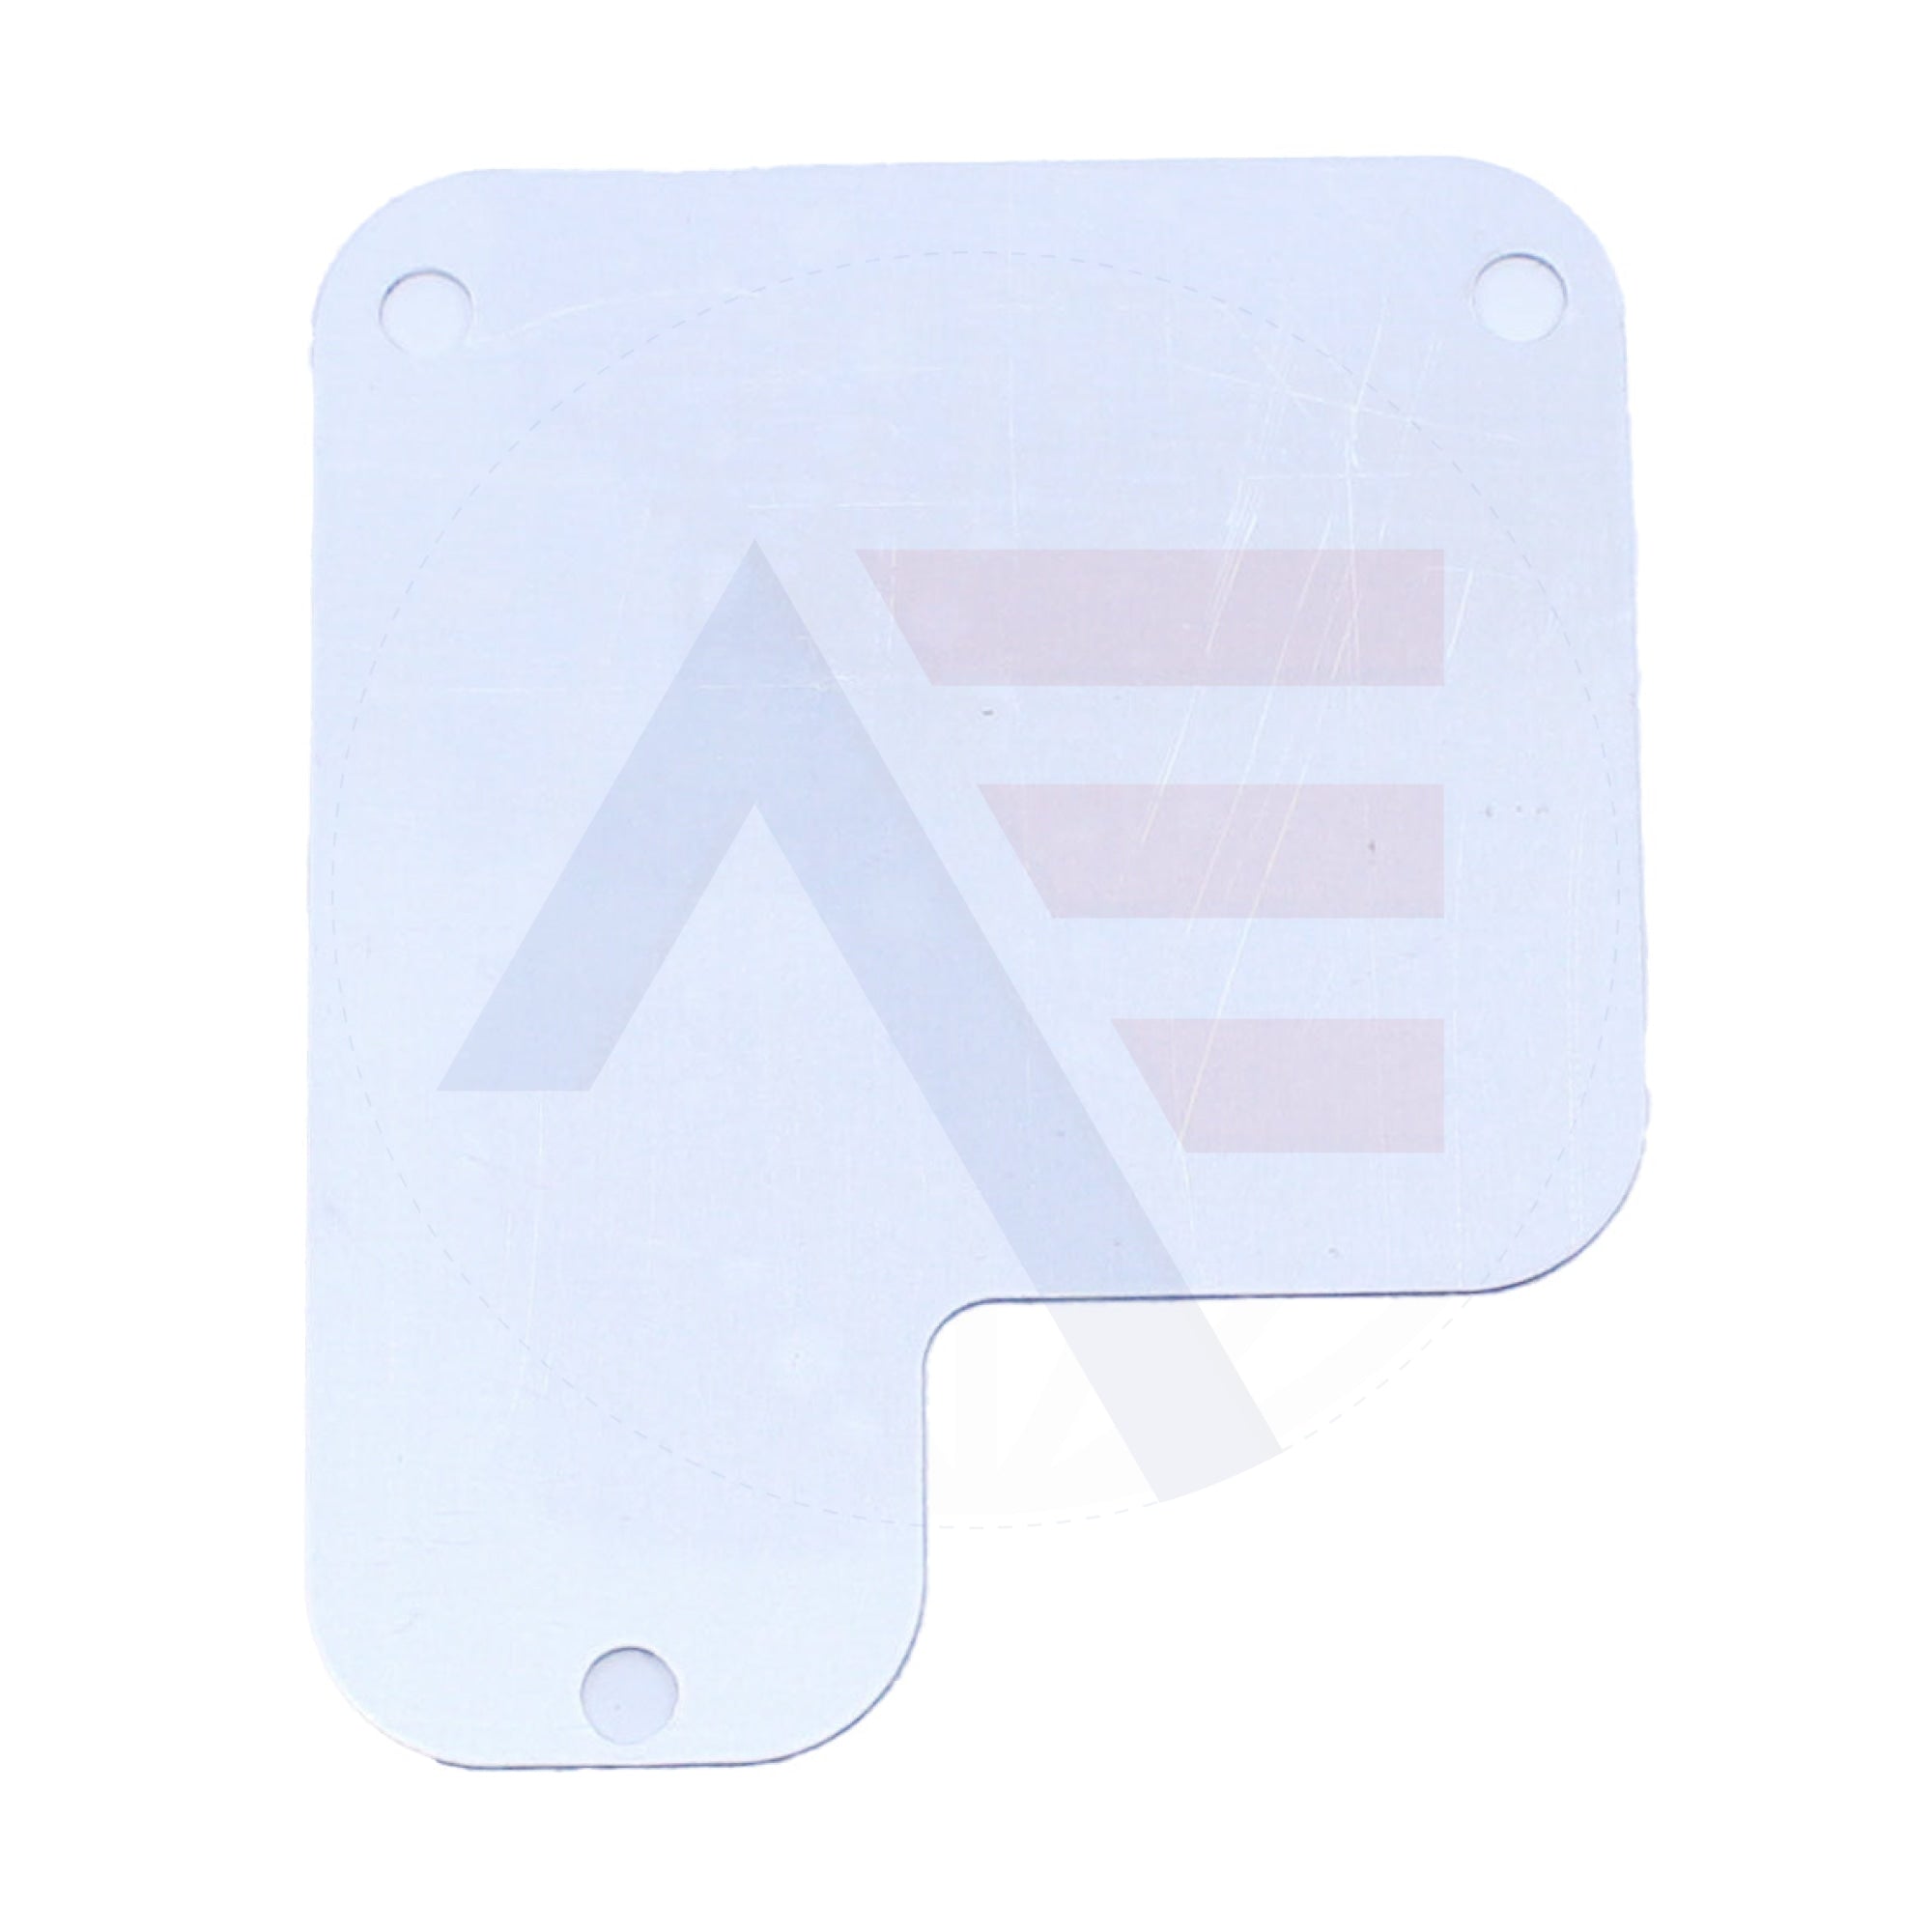 A103D Badge Cover Plate